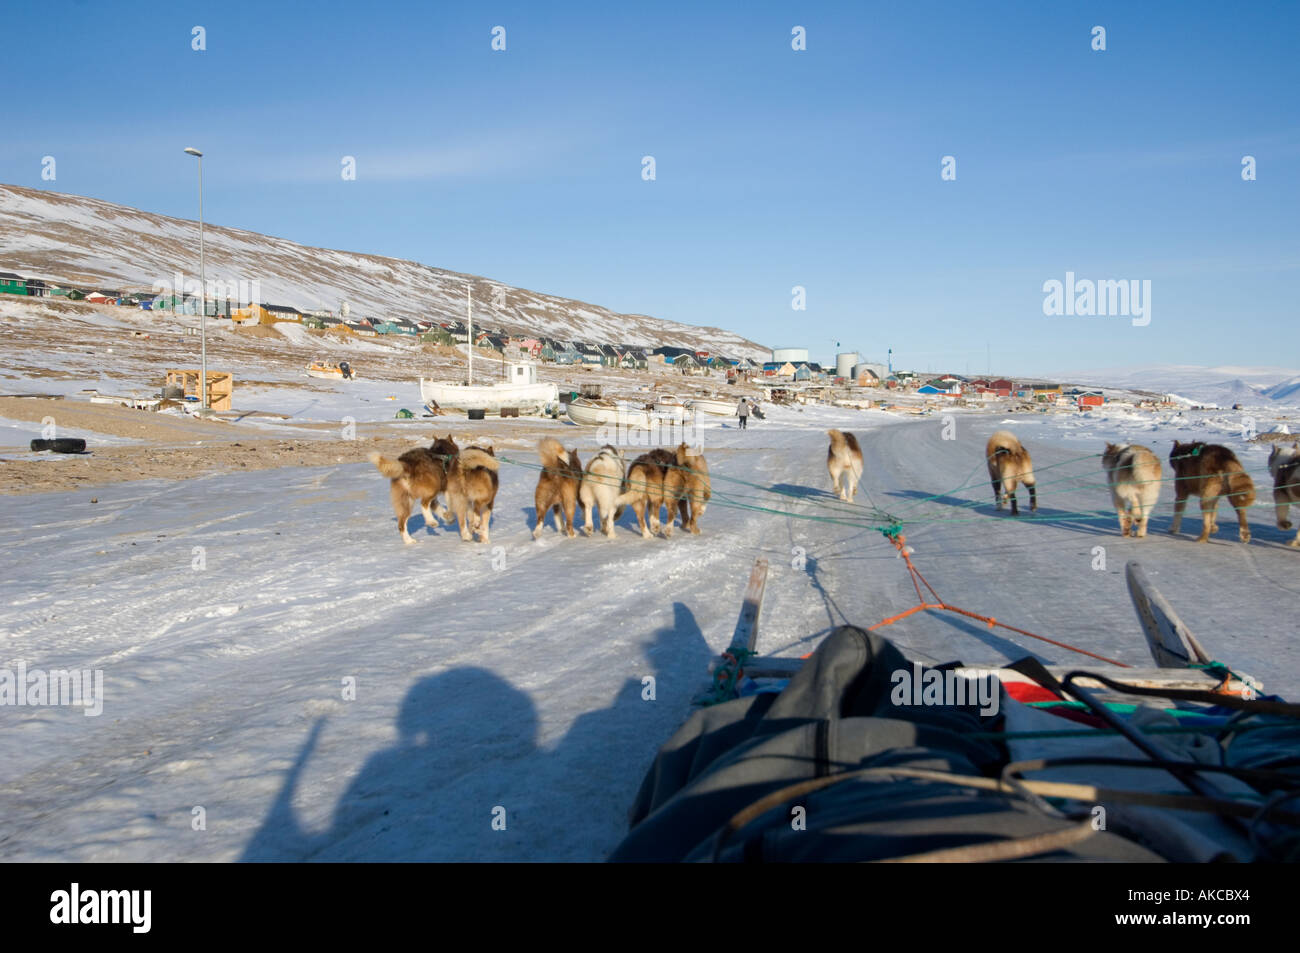 Qaanaaq Greenland April 2006 returning from seal hunting trip by dogsled into the town of Qaanaaq. Stock Photo